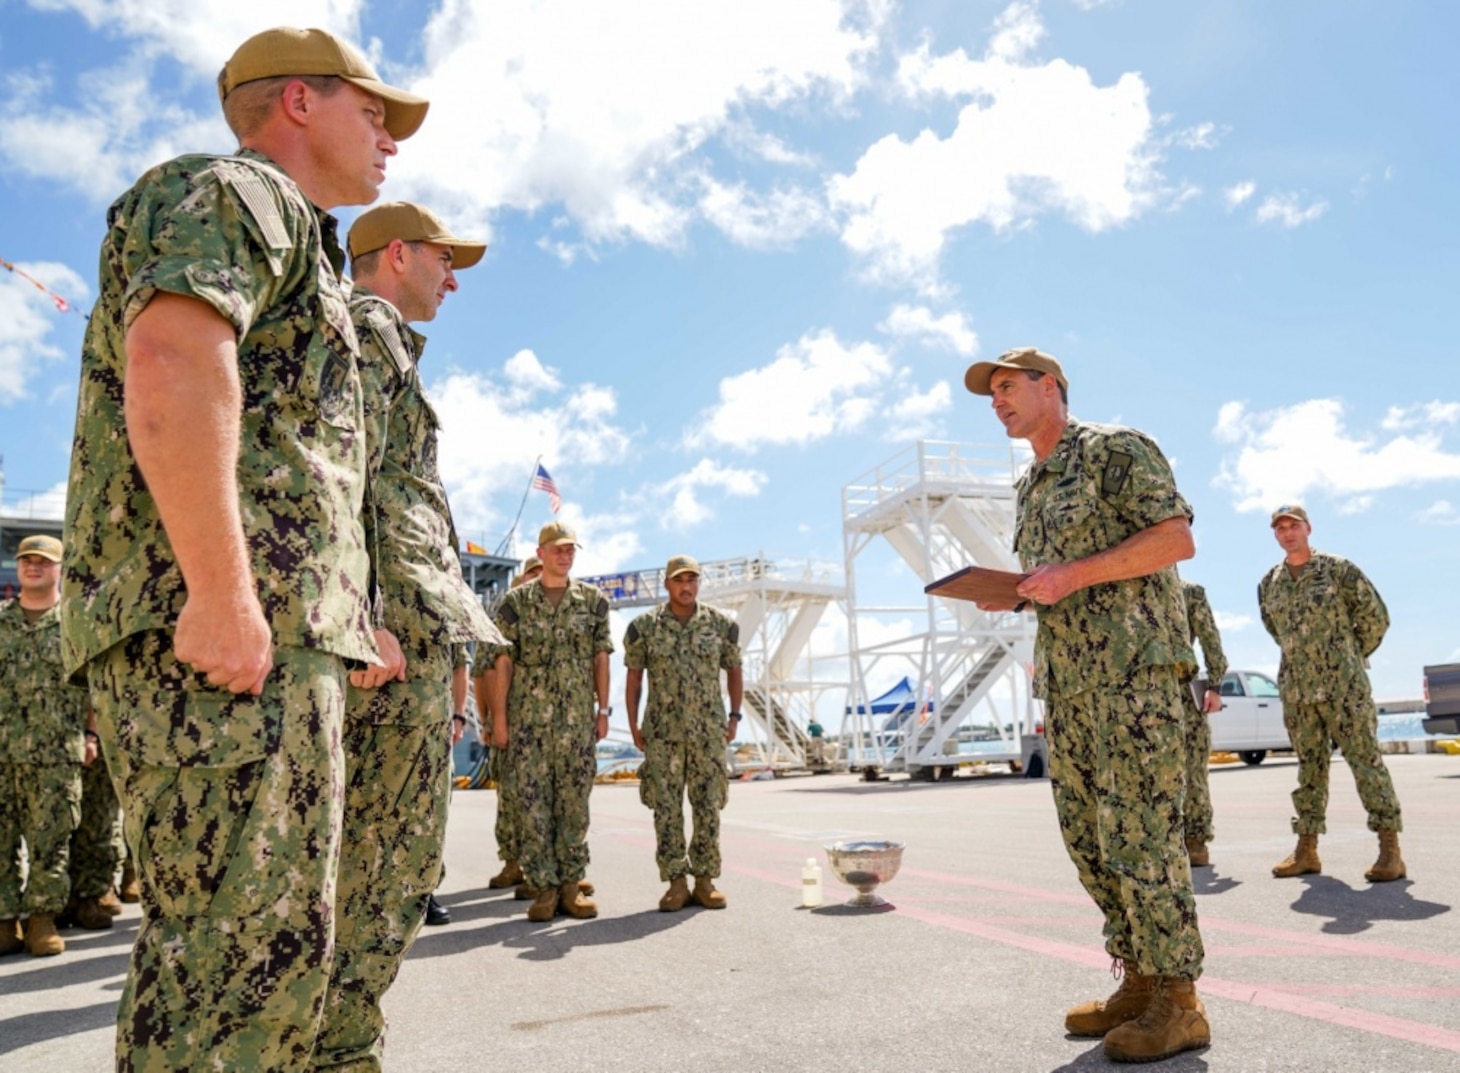 SANTA RITA, Guam (Feb. 7, 2020) Rear Adm. Blake Converse, Commander of Submarine Force, U.S. Pacific Fleet, presents the Battle “E” Award to Cmdr. Steven Lawrence, commanding officer of the Los Angeles-class fast attack submarine USS Oklahoma City (SSN 723), and his crew on the pier at Apra Harbor, Guam. Oklahoma City is one of four forward-deployed submarines assigned to Commander, Submarine Squadron Fifteen out of Apra Harbor, Guam.